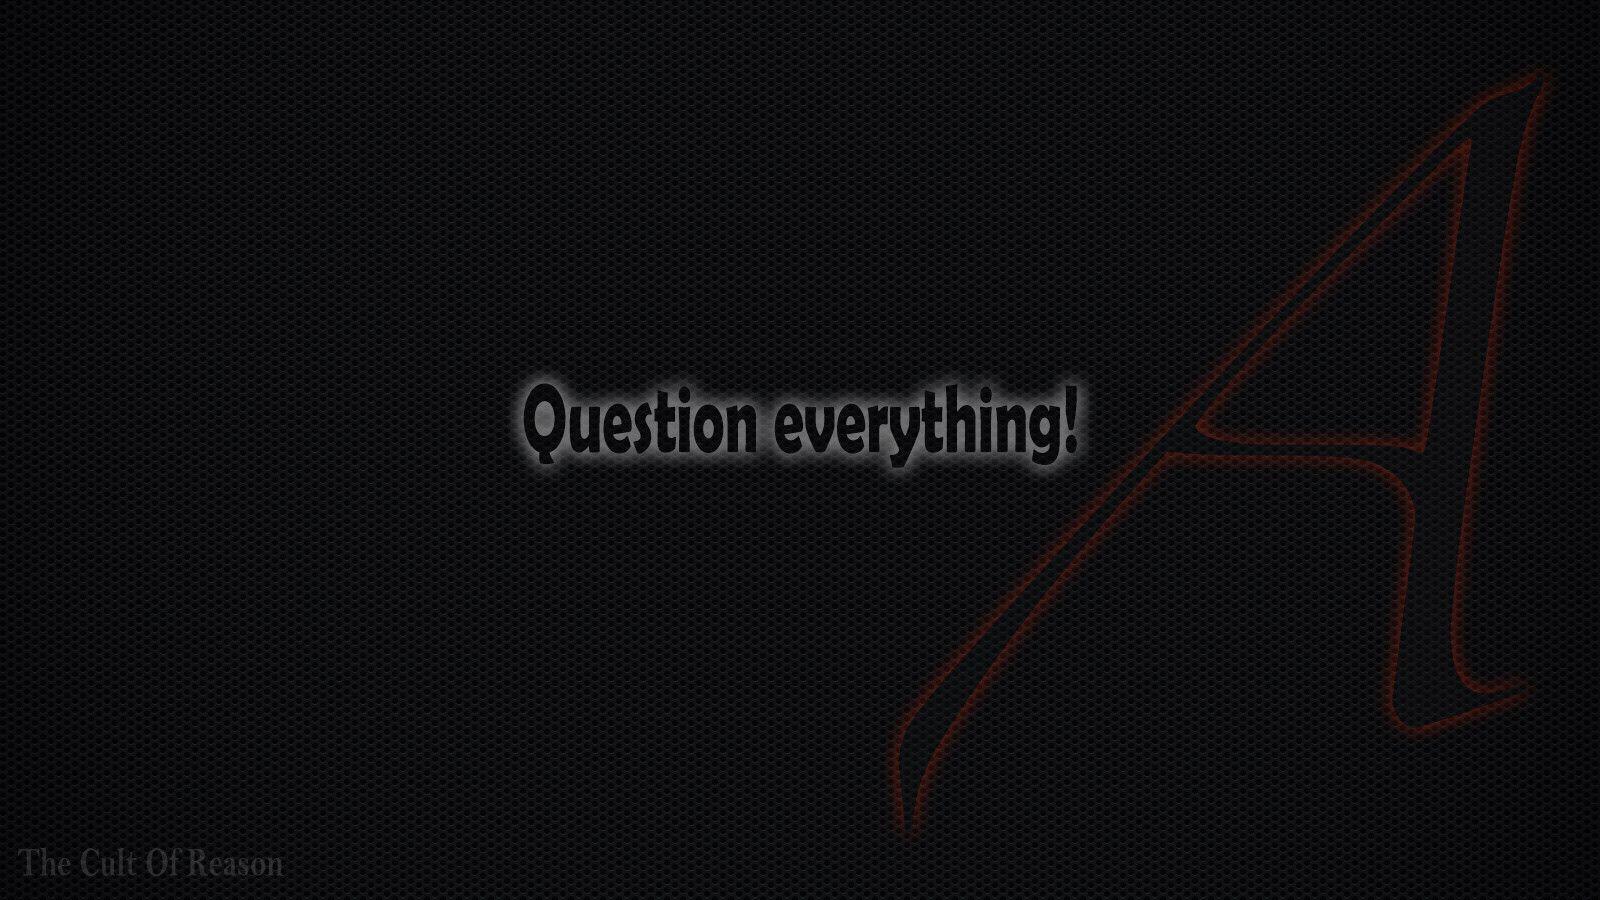 Free Atheism wallpaper Question Everything!